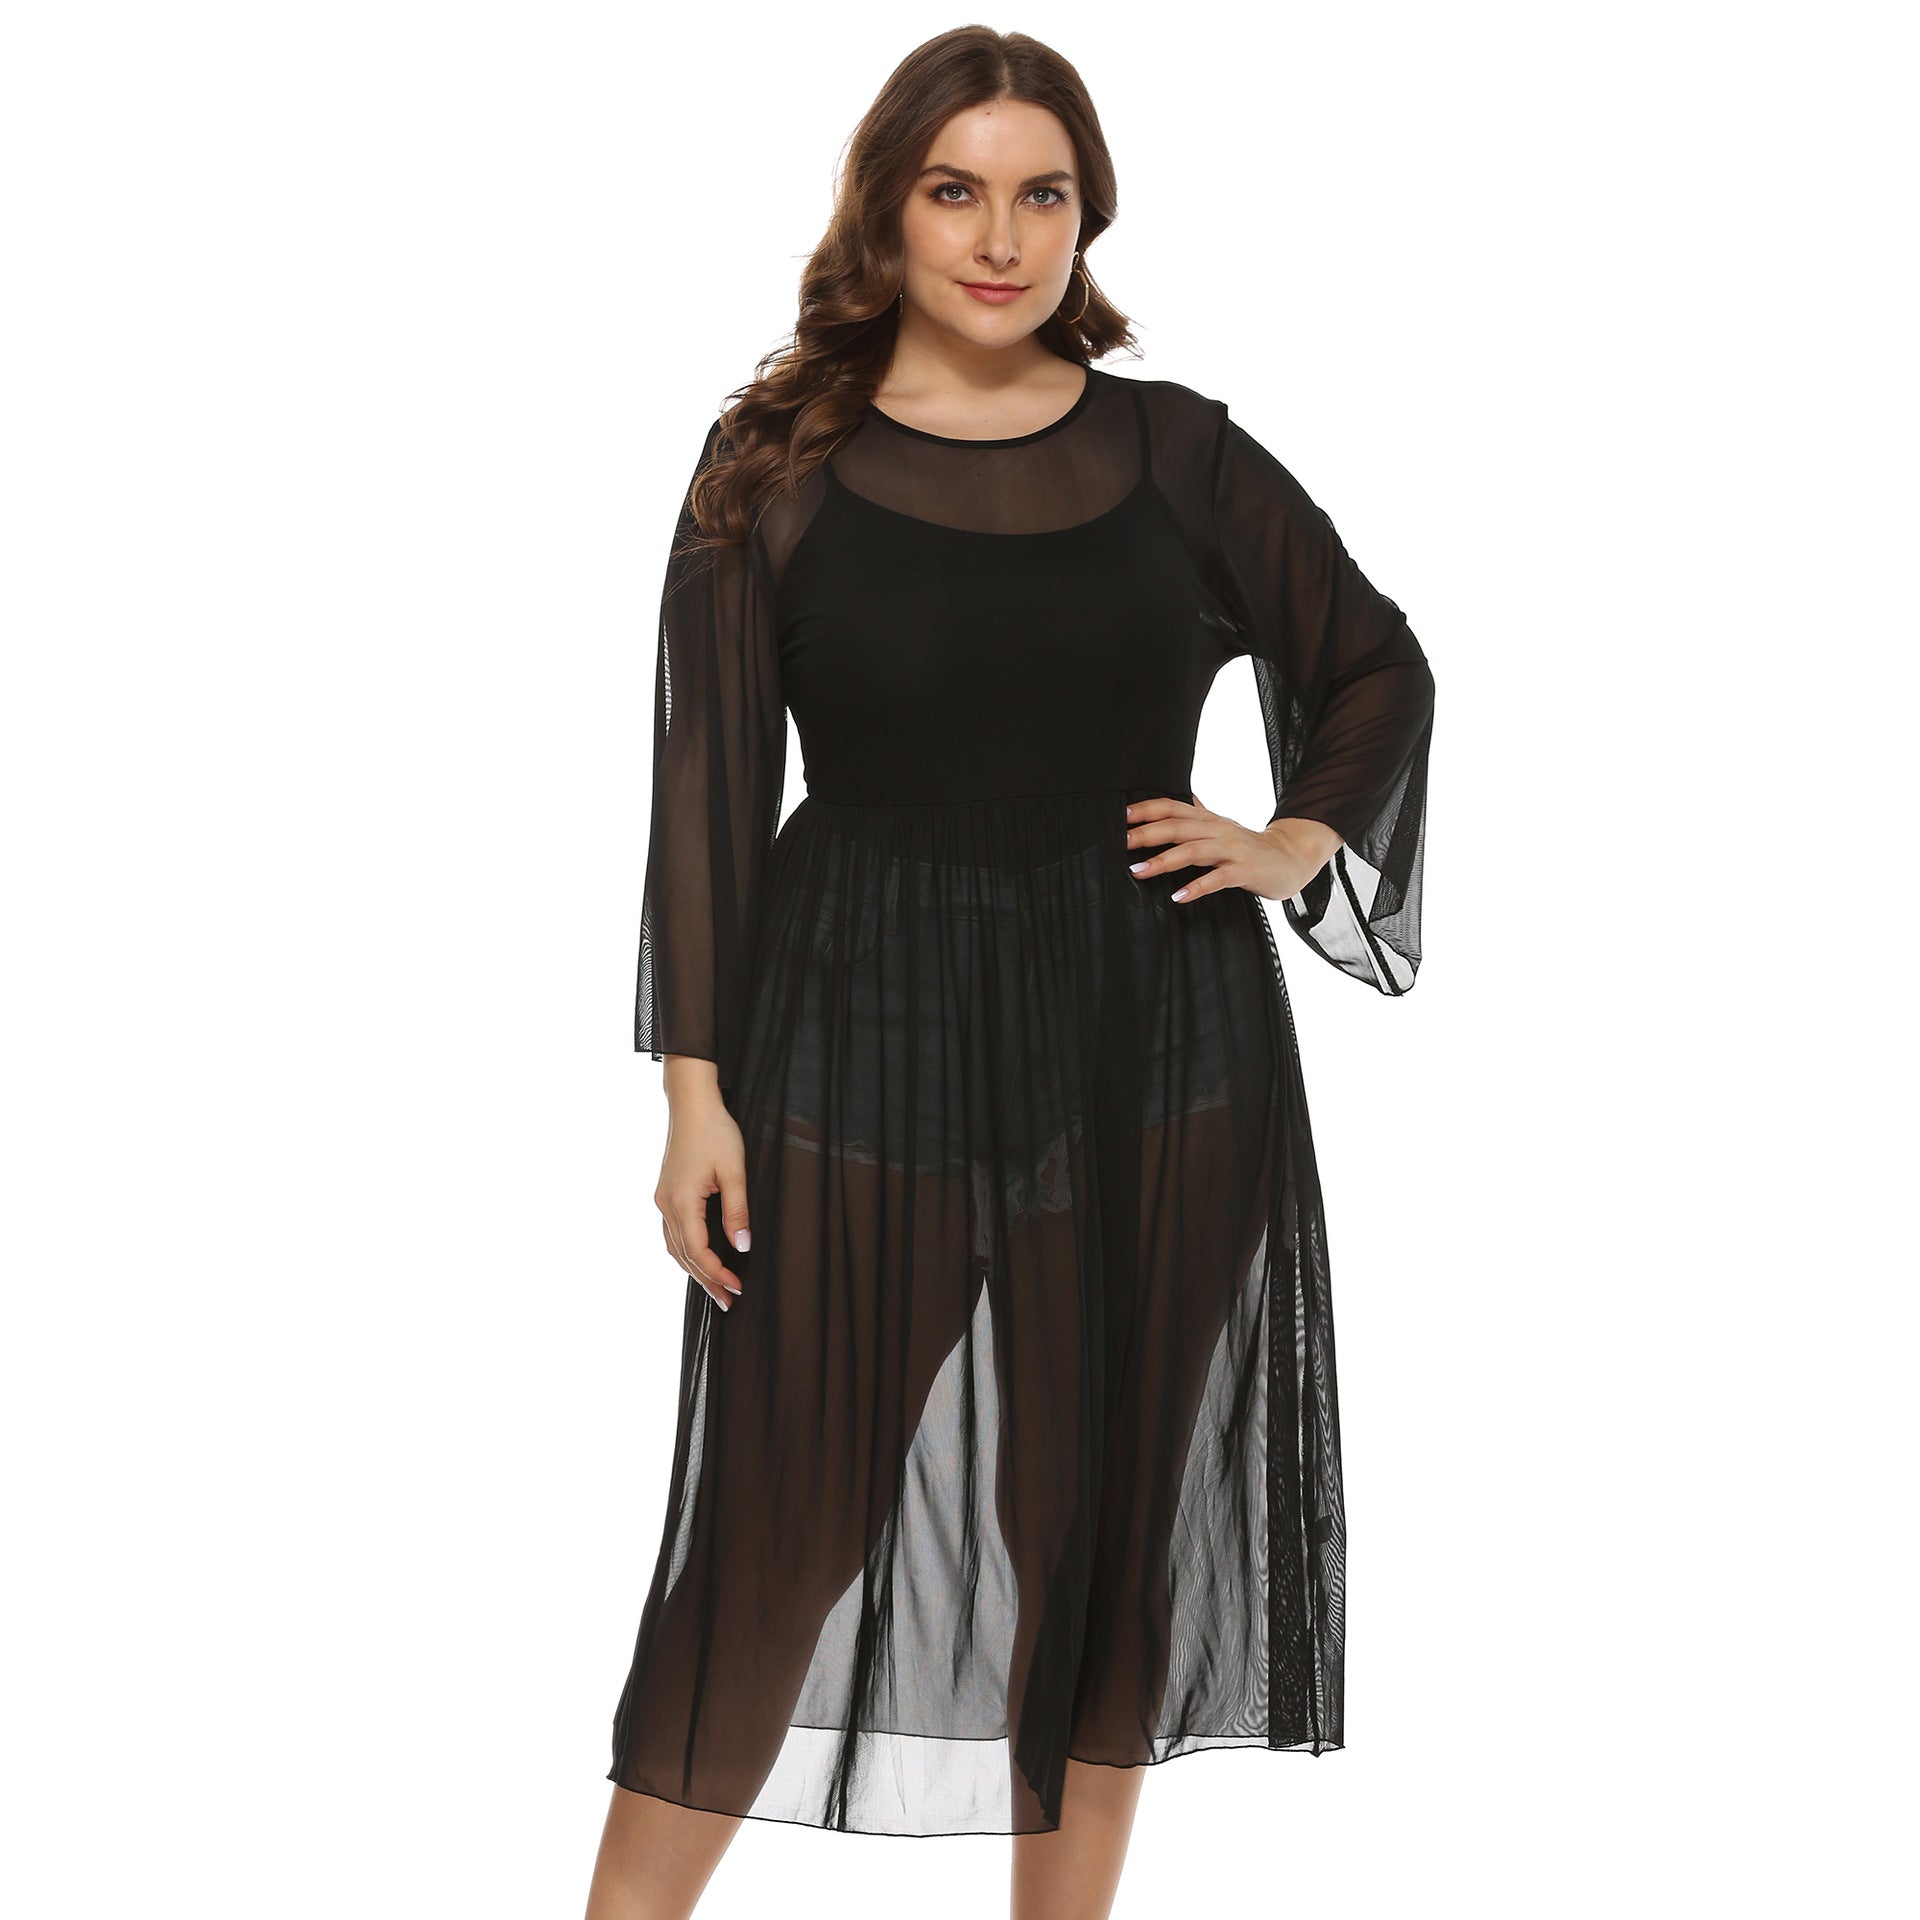 Black Sexy See Throught Plus Sizes Summber Beach Cover Ups-Swimwear-Black-1XL-Free Shipping at meselling99